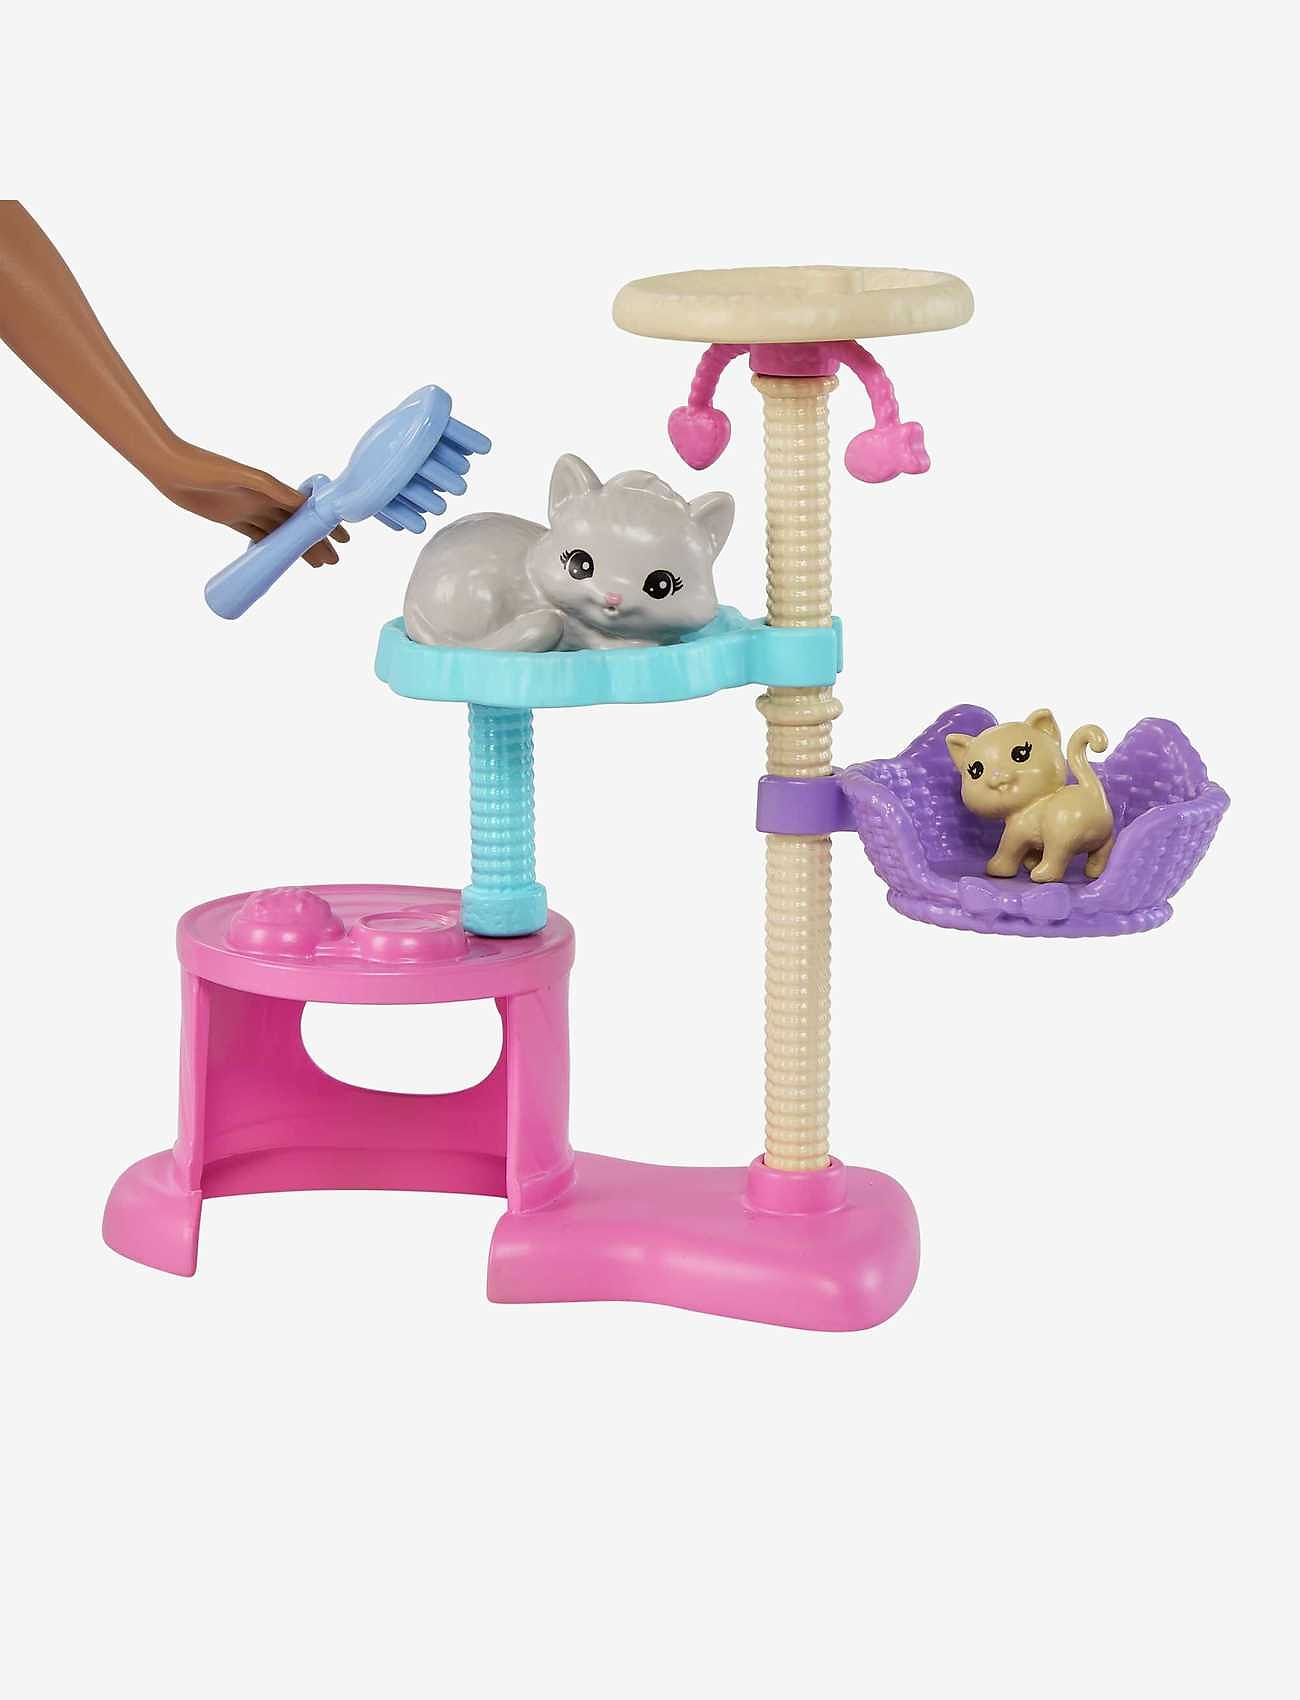 Barbie - Kitty Condo Doll and Pets - dukker - multi color - 1